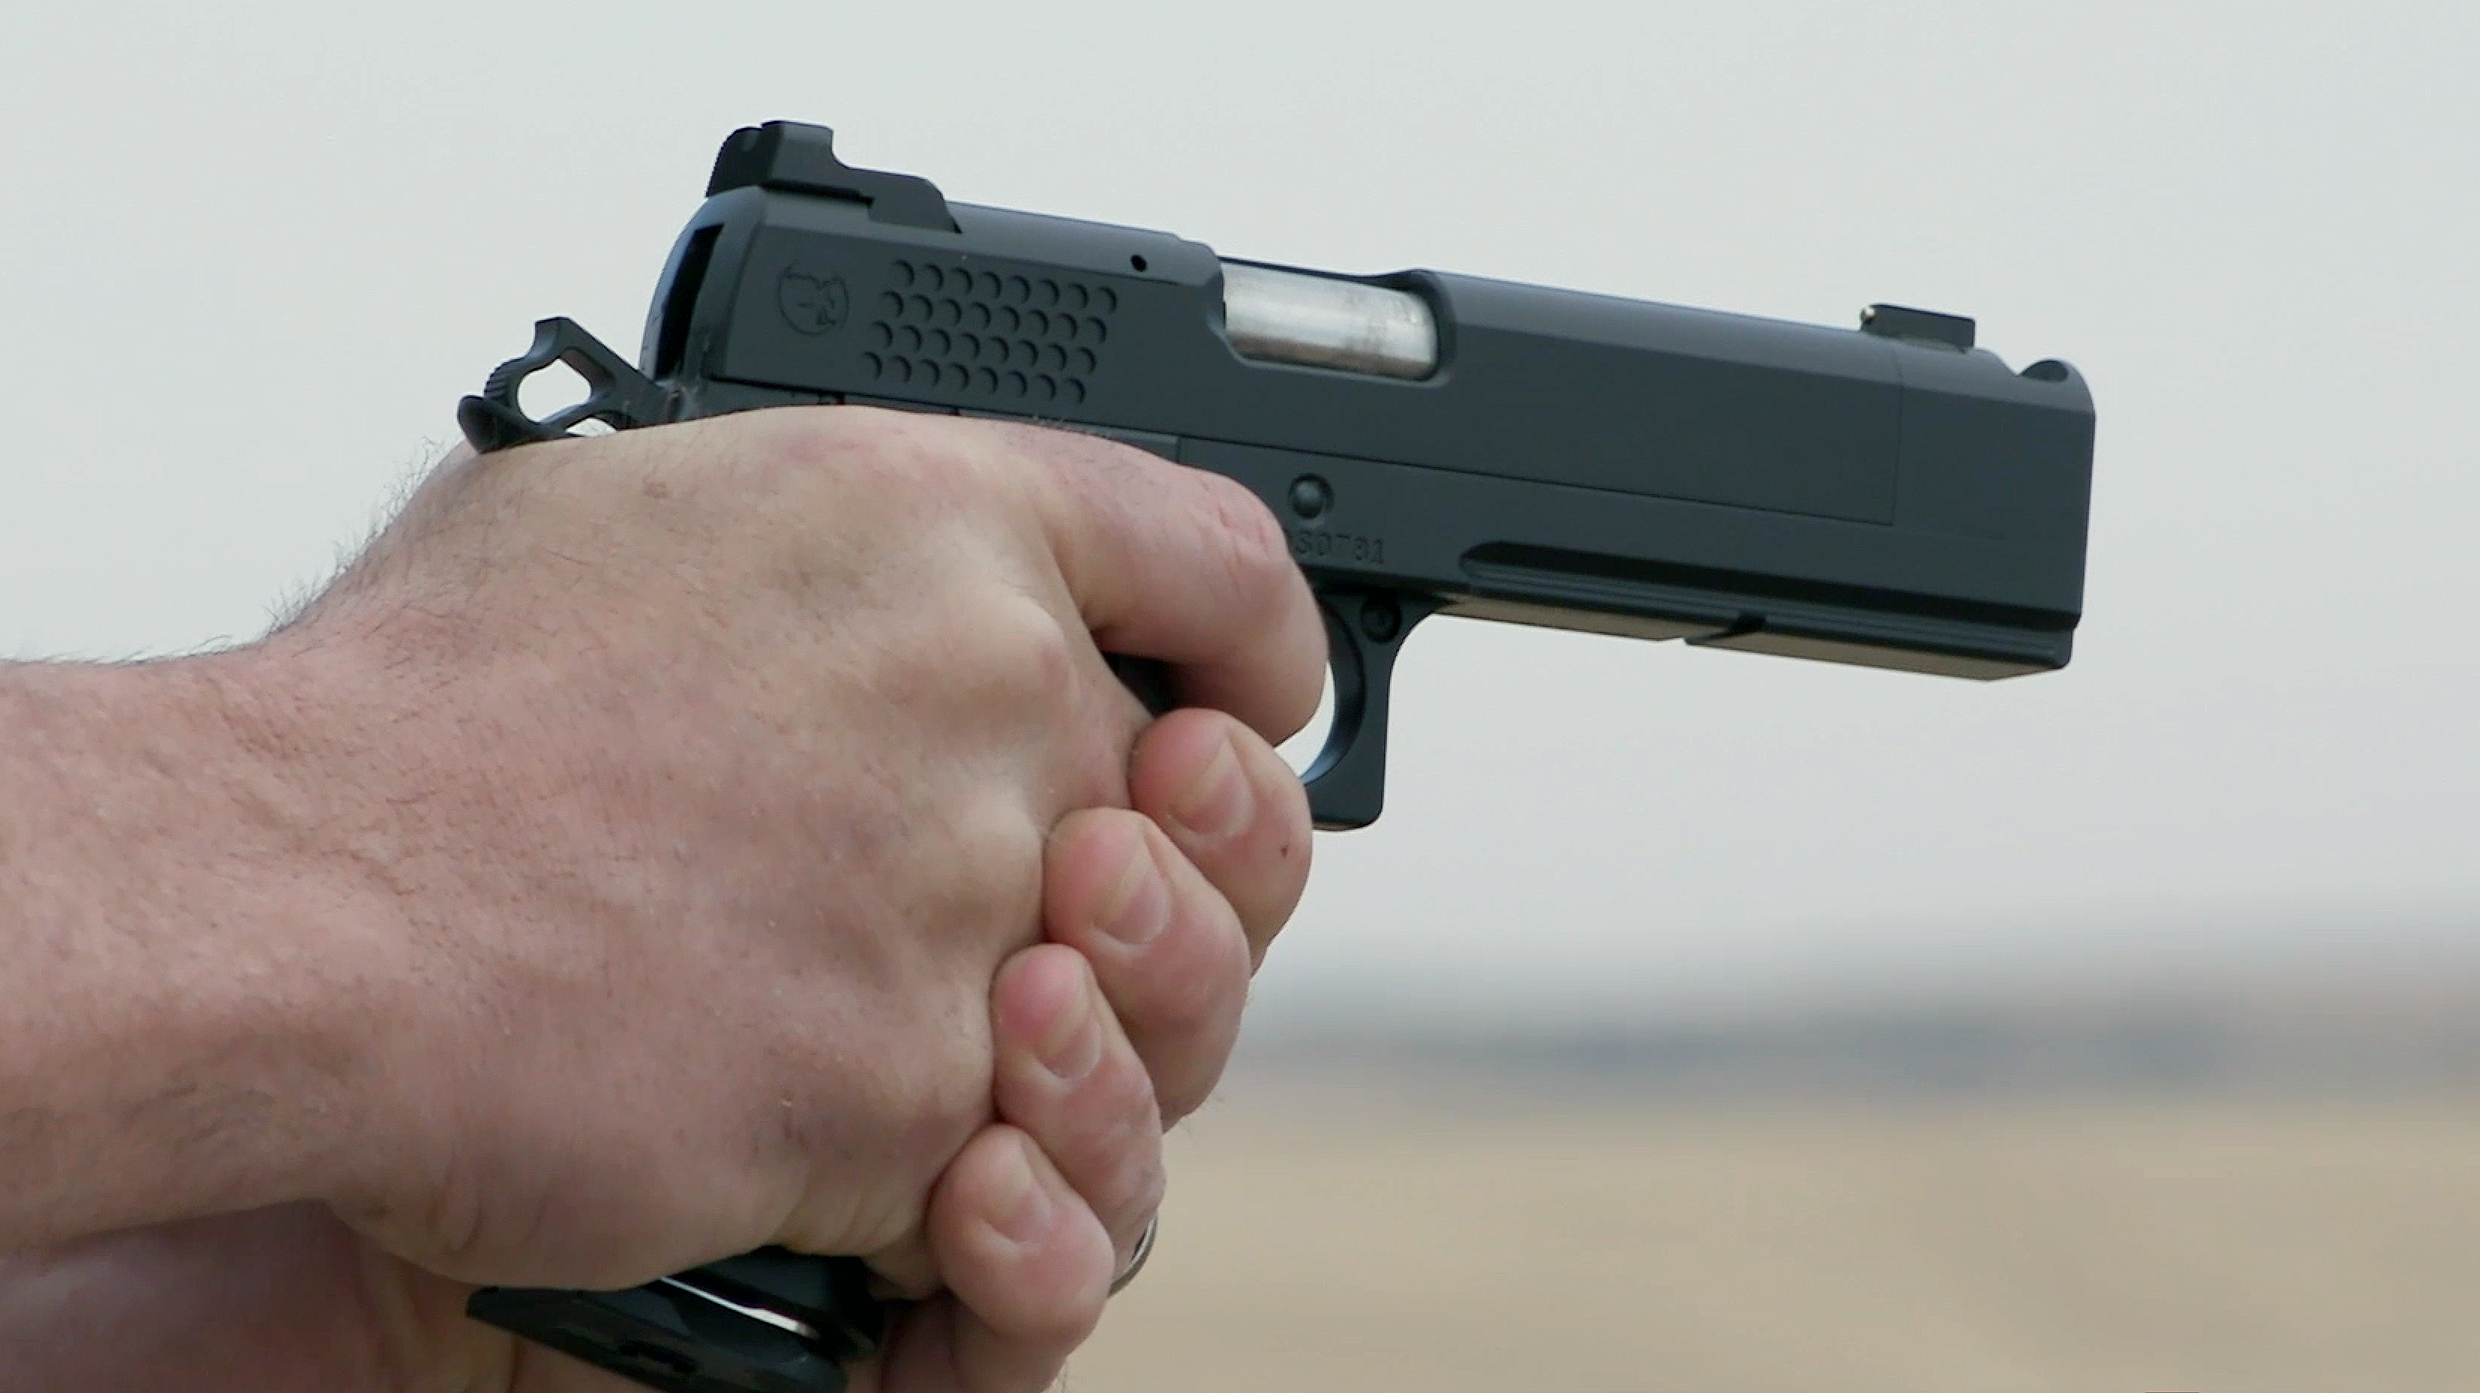 The Nighthawk TRS Comp is the company's first double-stack 1911.